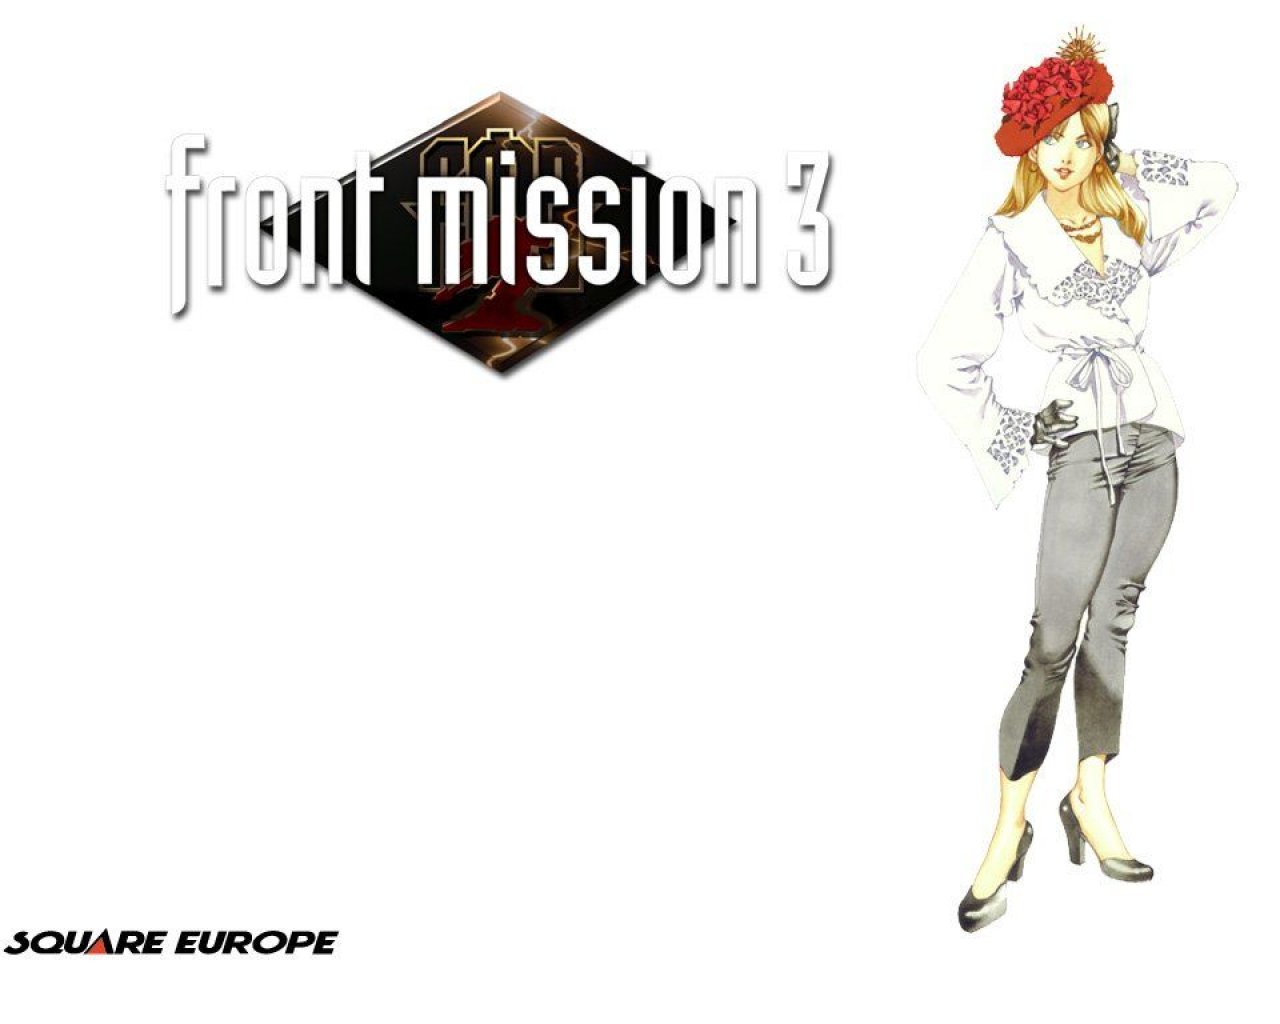 Amazing Front Mission 3 Pictures & Backgrounds